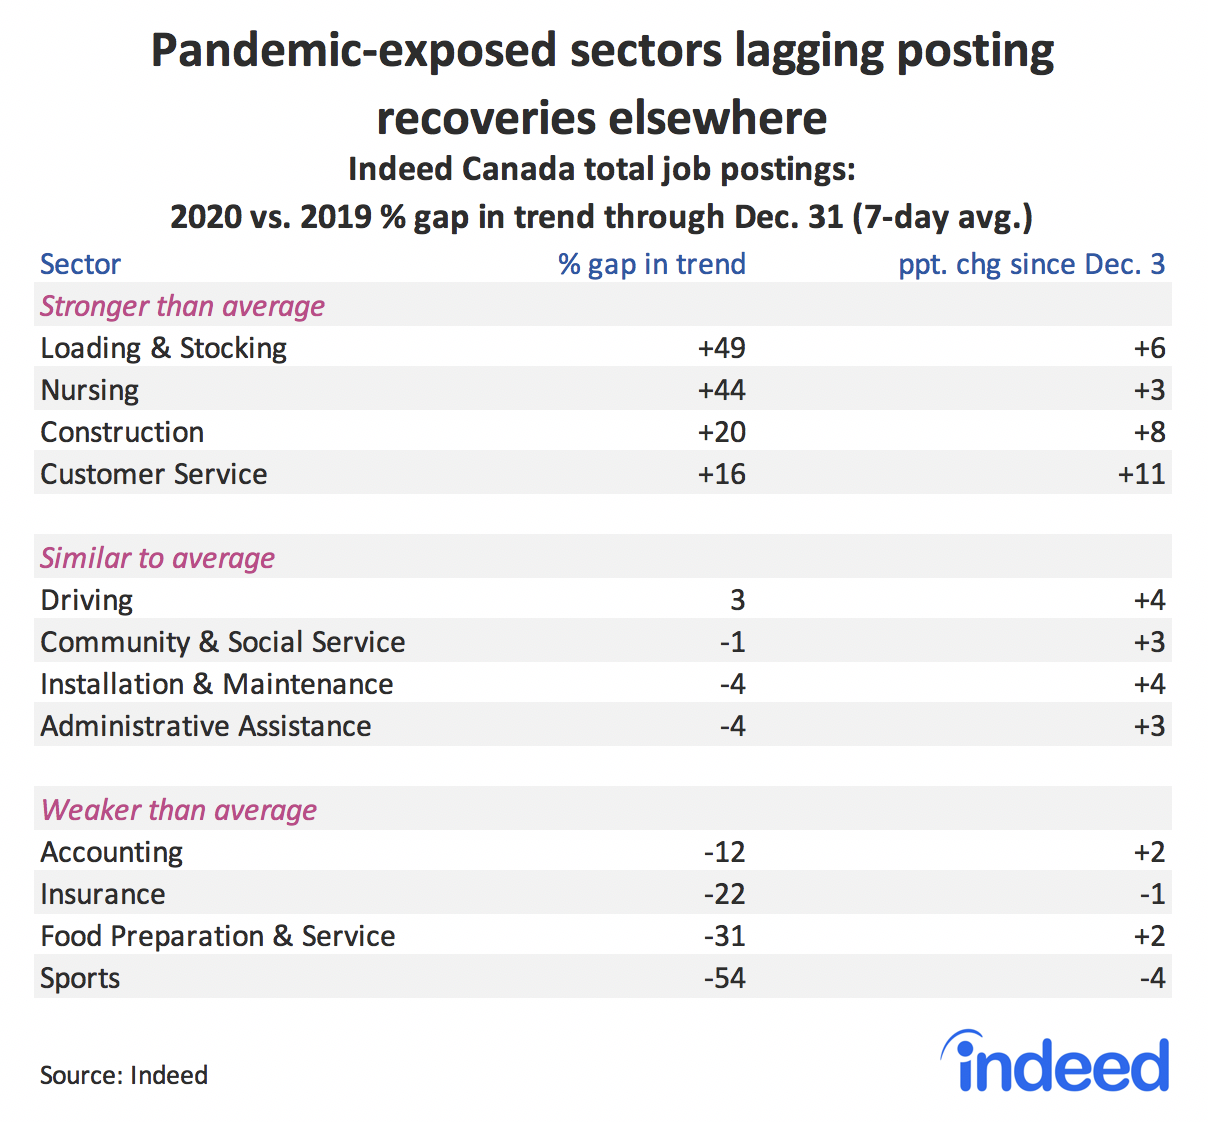 Table showing pandemic-exposed sectors lagging posting recoveries elsewhere